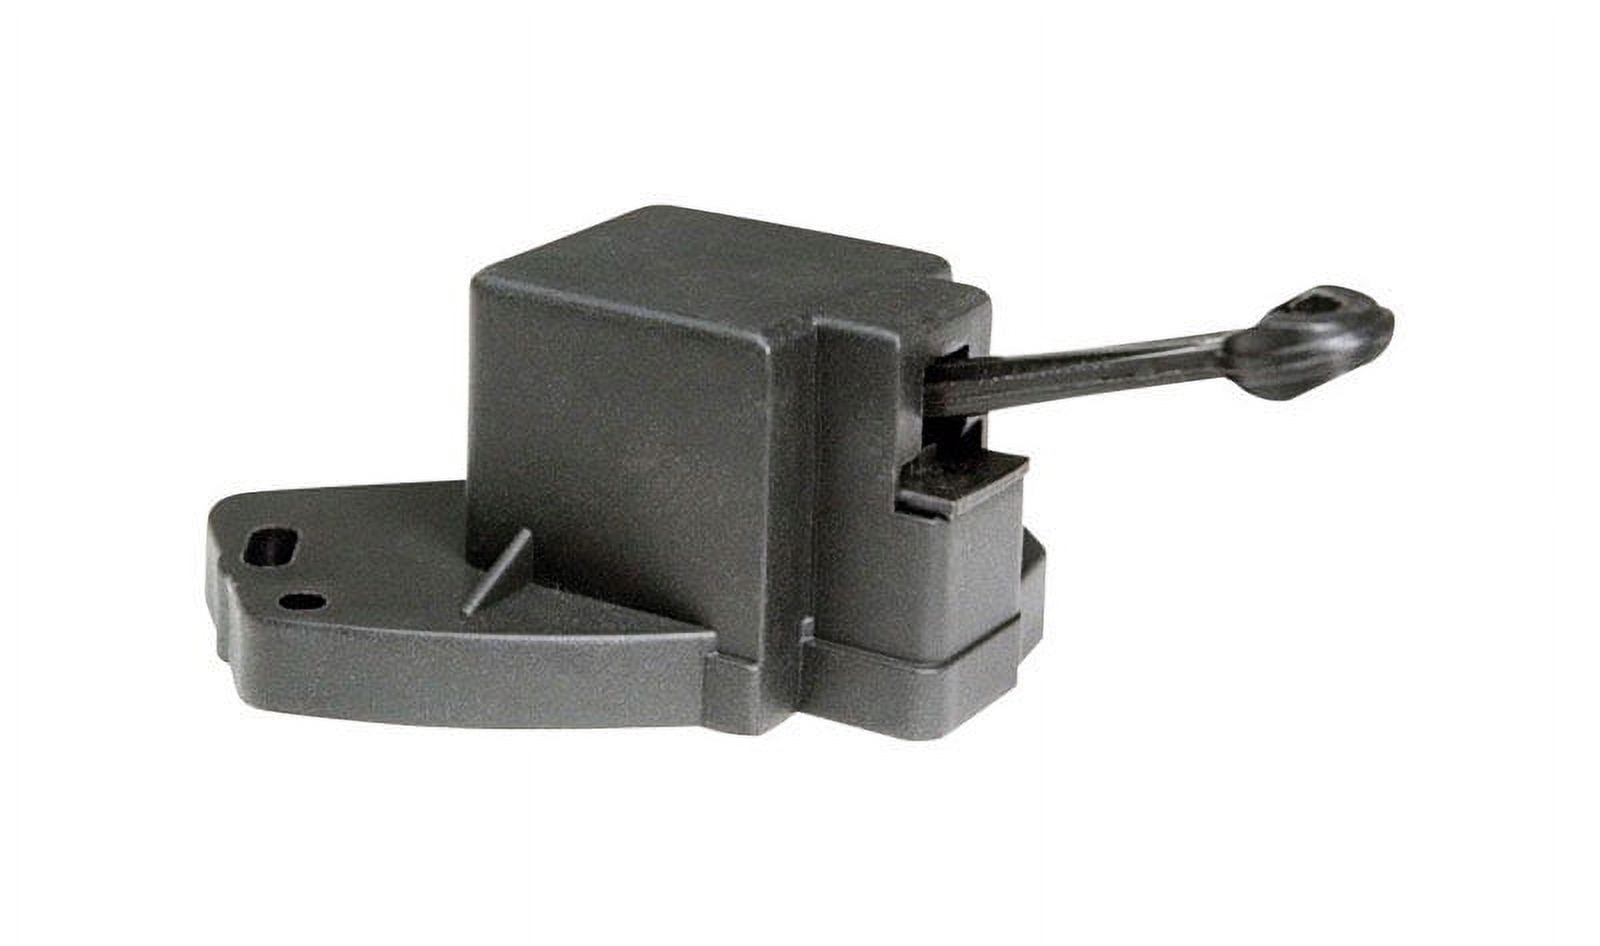 4793105 Flotec Thermoplastic Sump Pump Switch Vertical